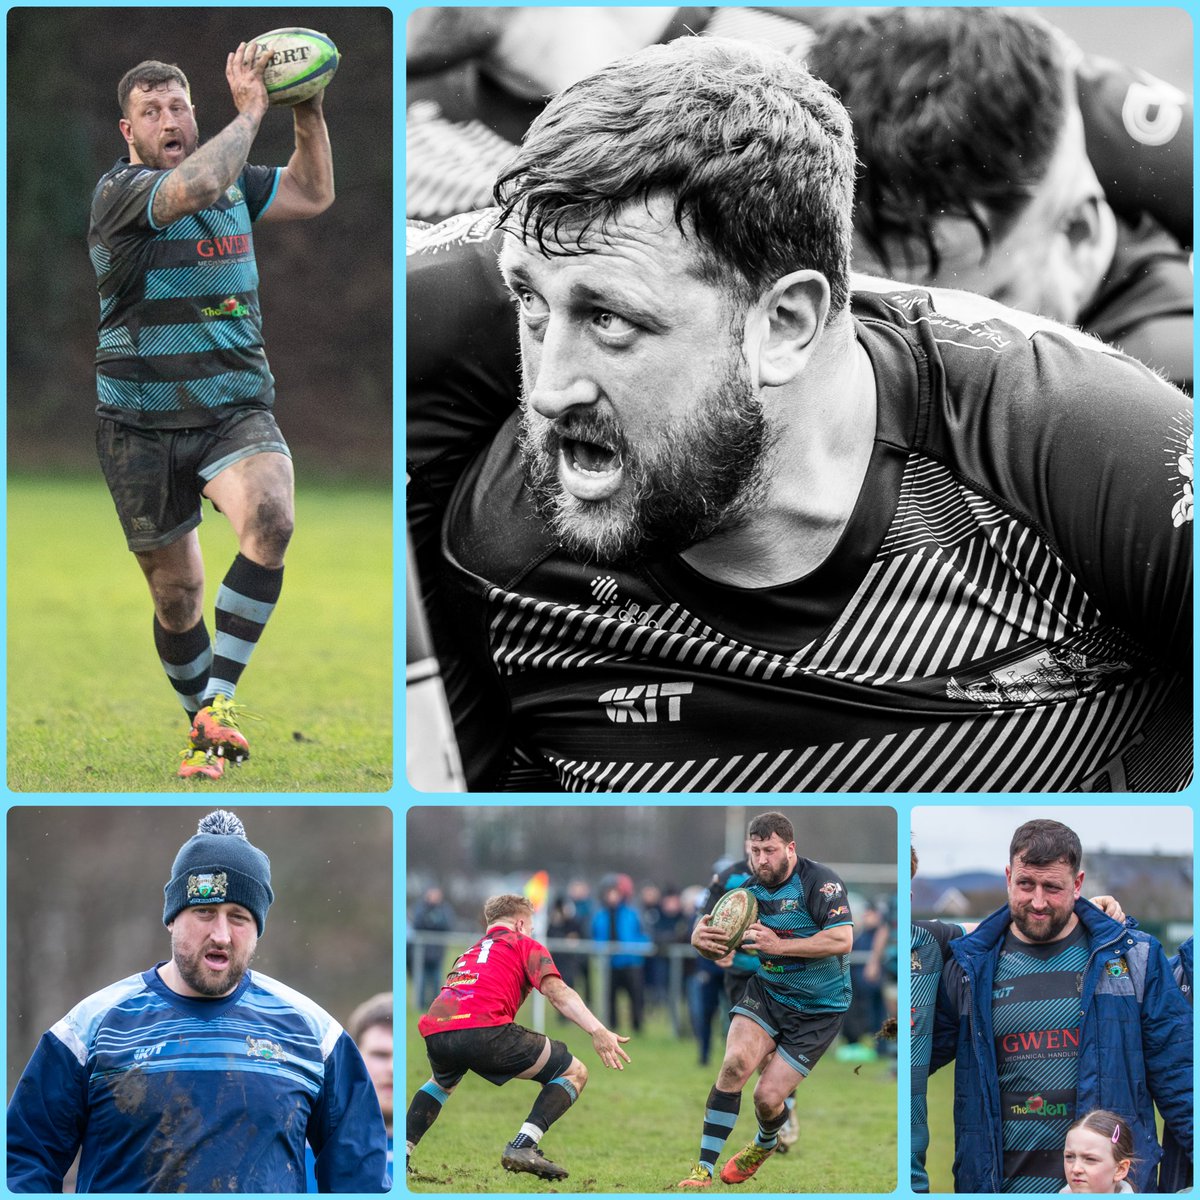 KAV HITS 150!!🩵🐷🖤
Congratulations to one of the cornerstones of our team - Michael Kavanagh - who hits his 150th game for the Club tomorrow. Well done Kav!👍🏻👏🏻👏🏻👏🏻